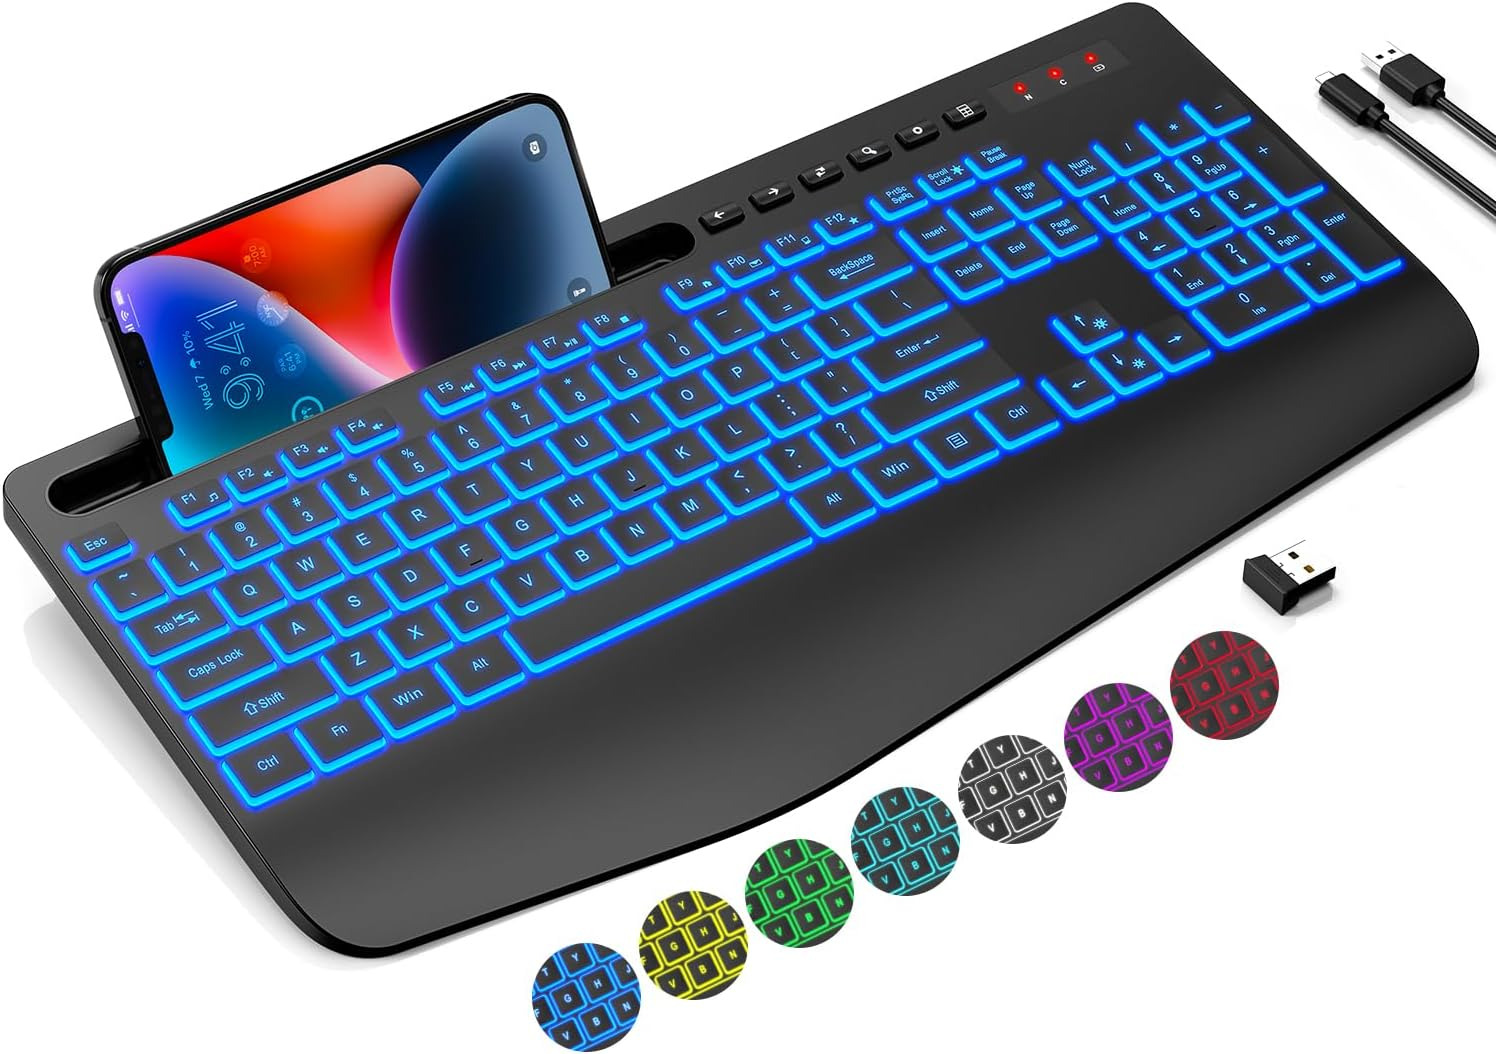 Trueque Wireless Keyboard with 7 Colored Backlits, Wrist Rest, Phone Holder, Rec